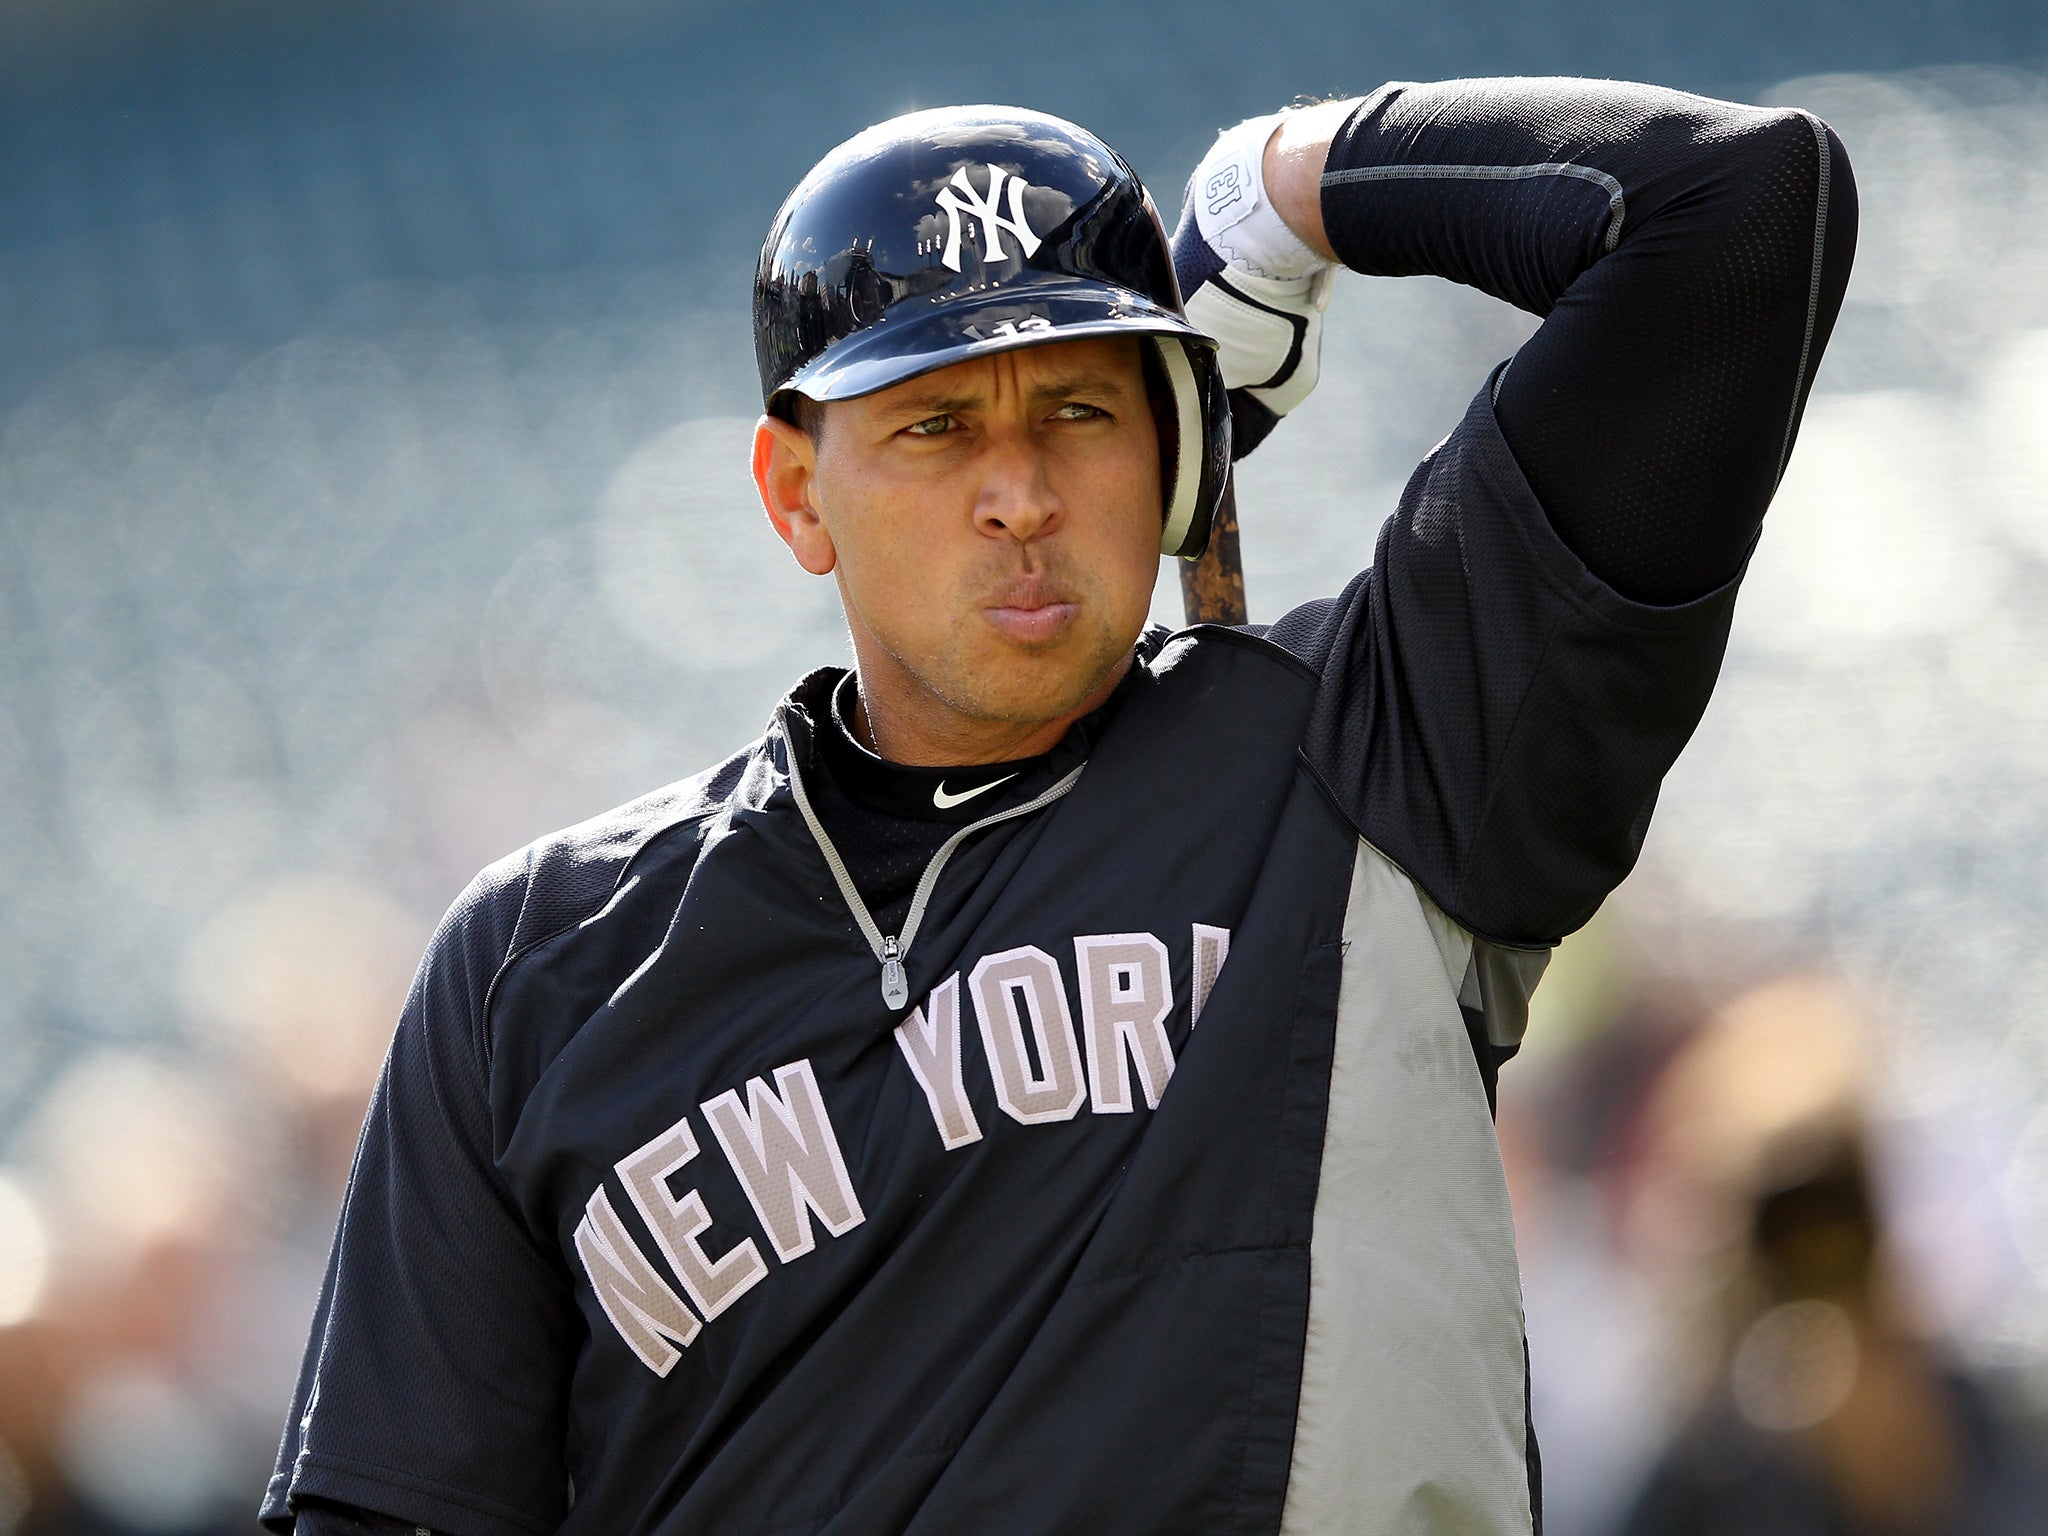 Spring training has been tempered by another “apology” from Alex Rodriguez for using steroids